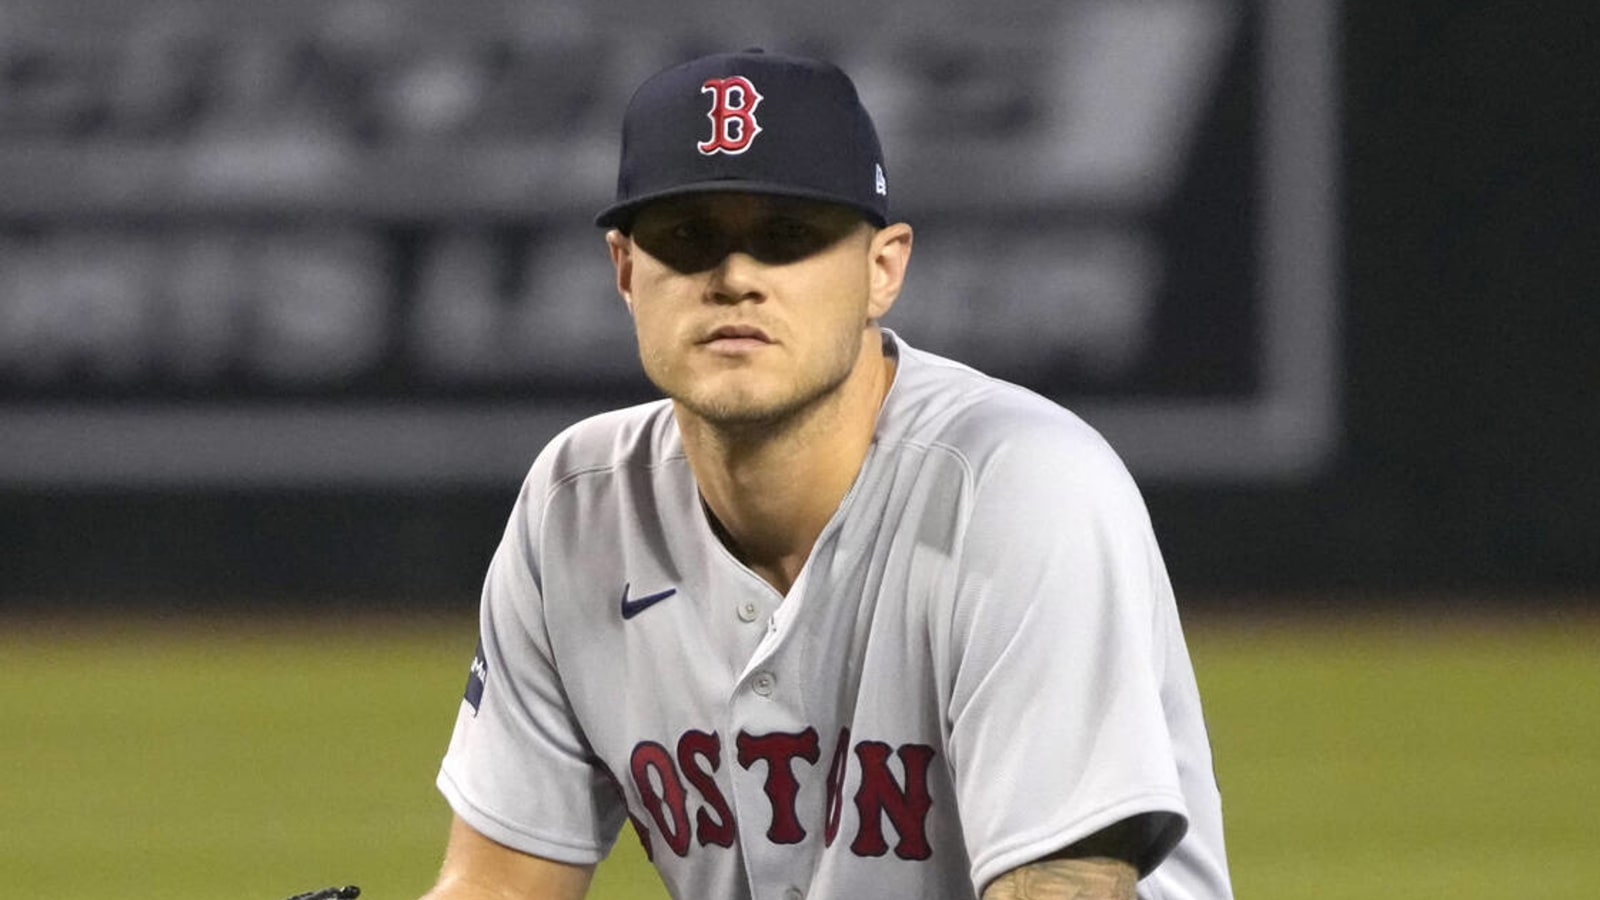 Red Sox pitcher suffers facial fracture after comebacker